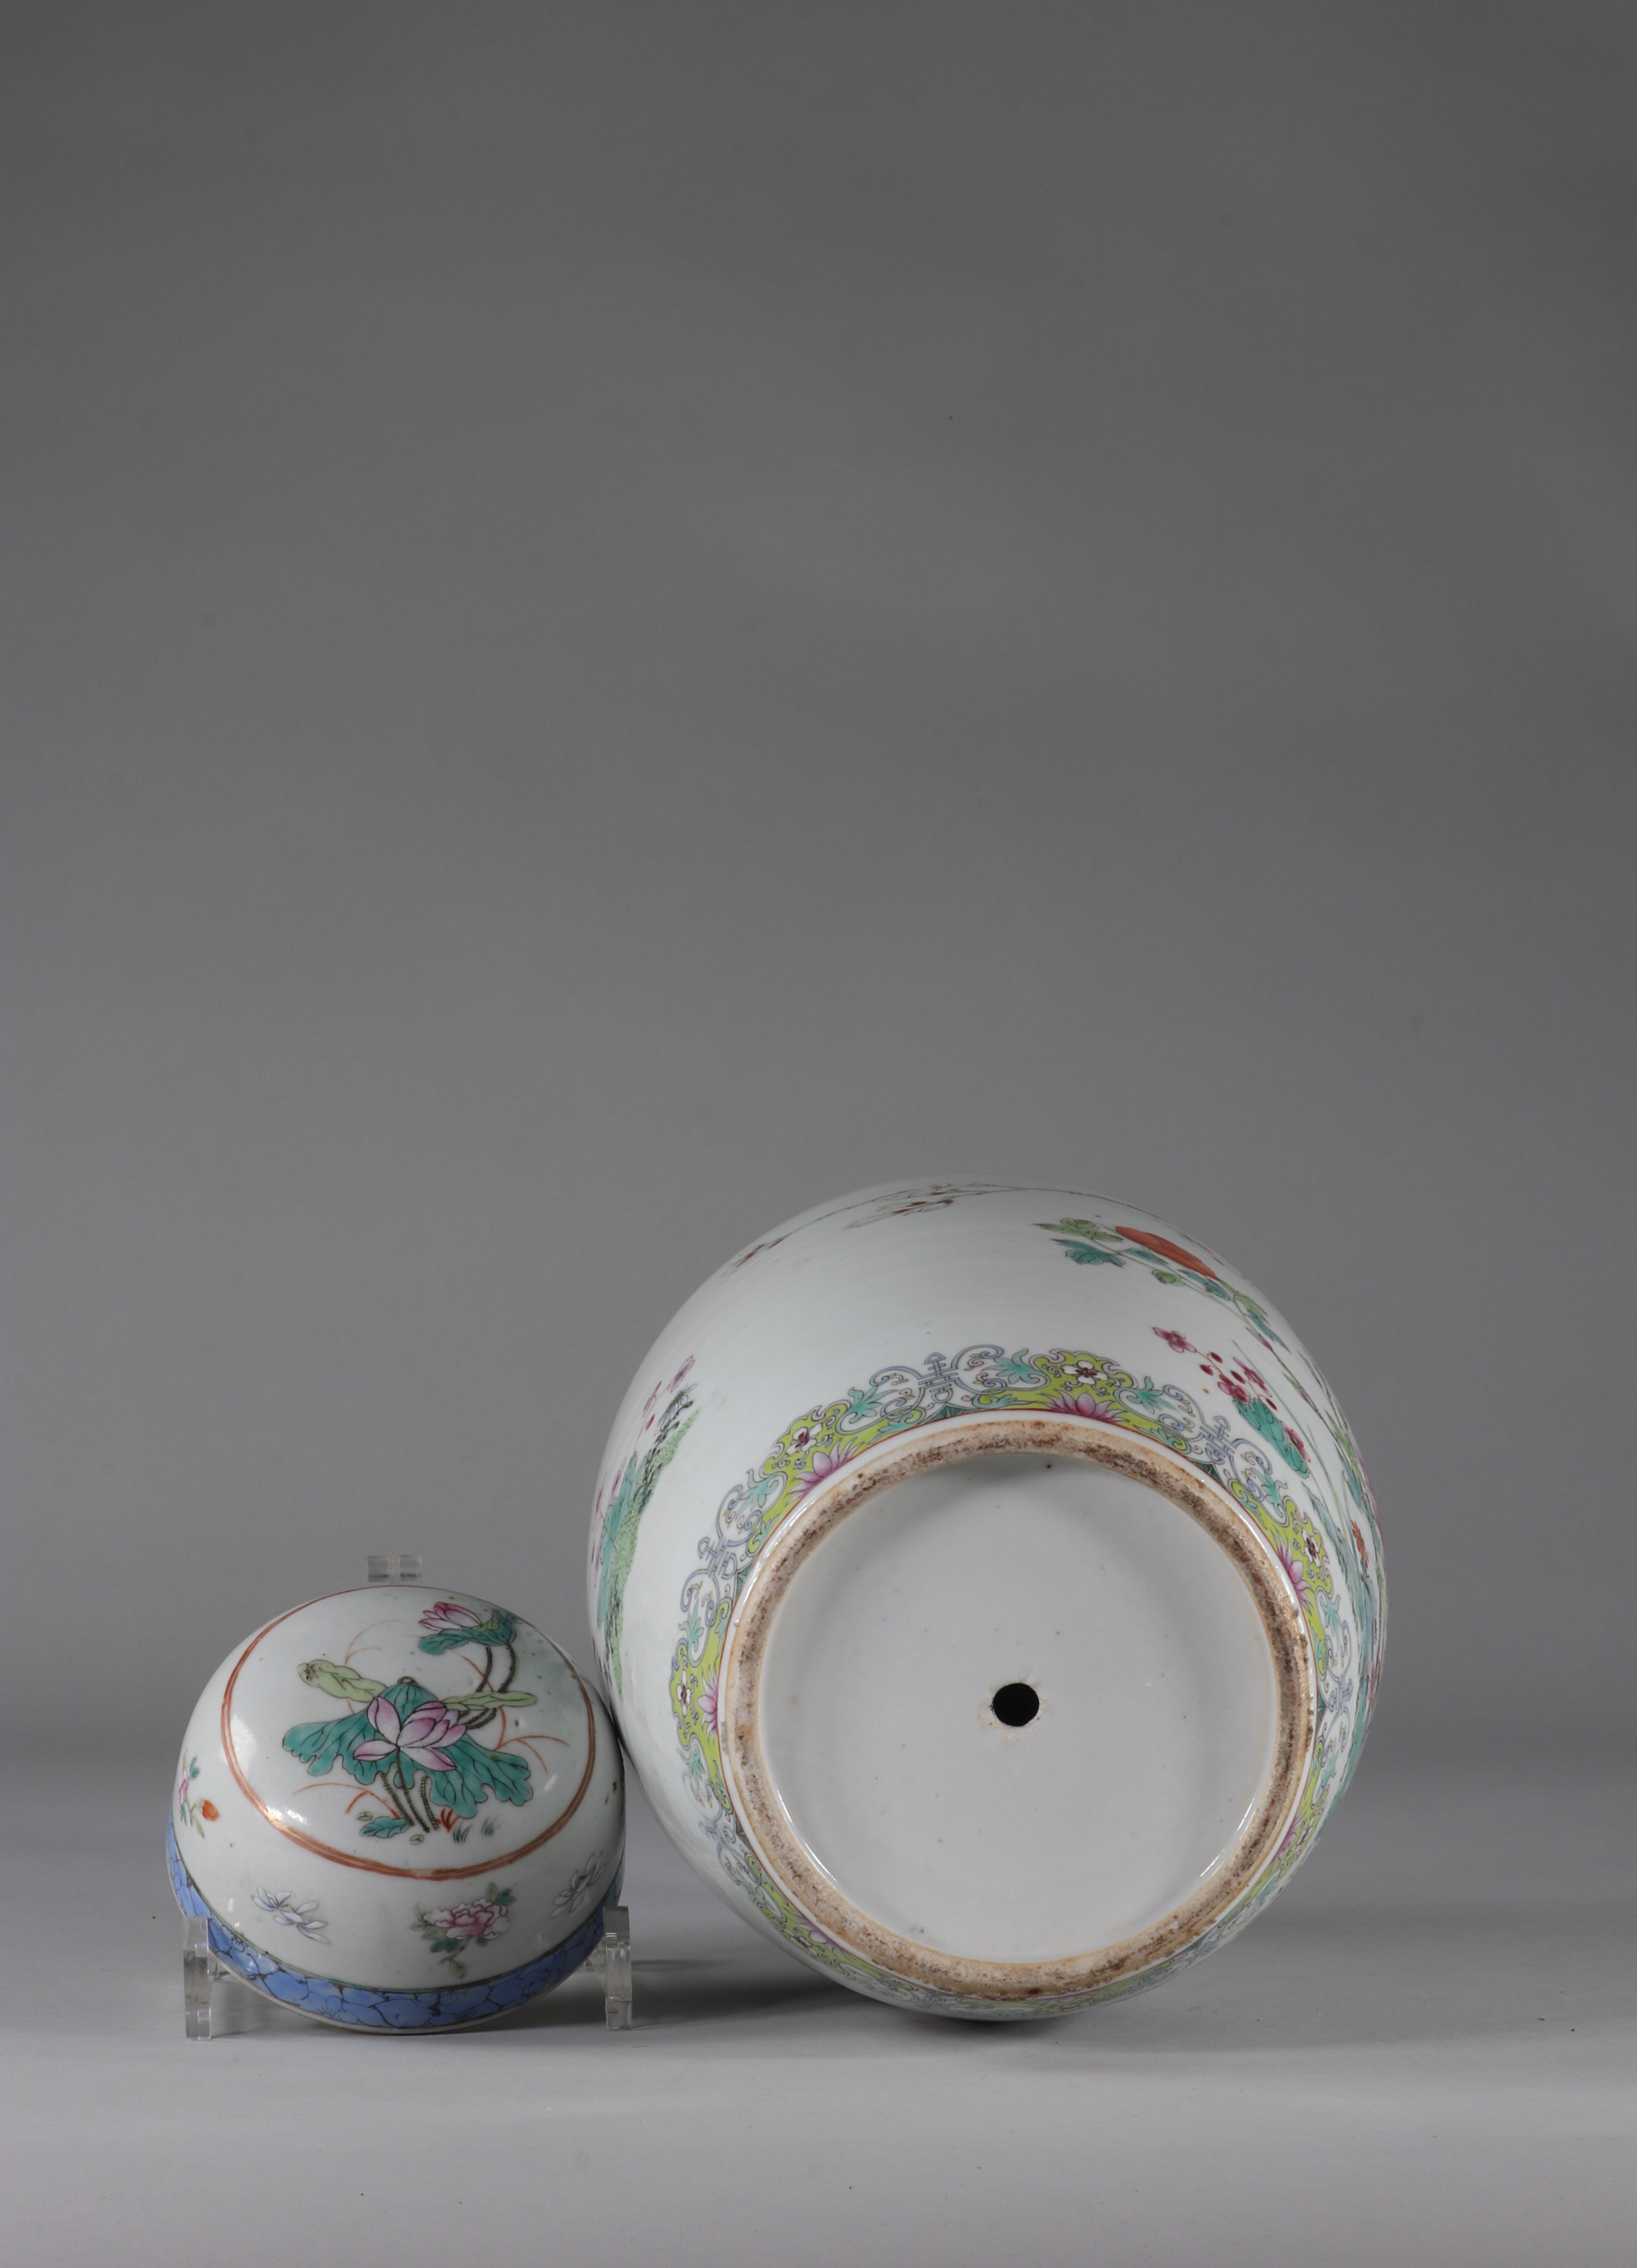 China famille rose porcelain vase decorated with birds and flowers Qing period - Image 7 of 7